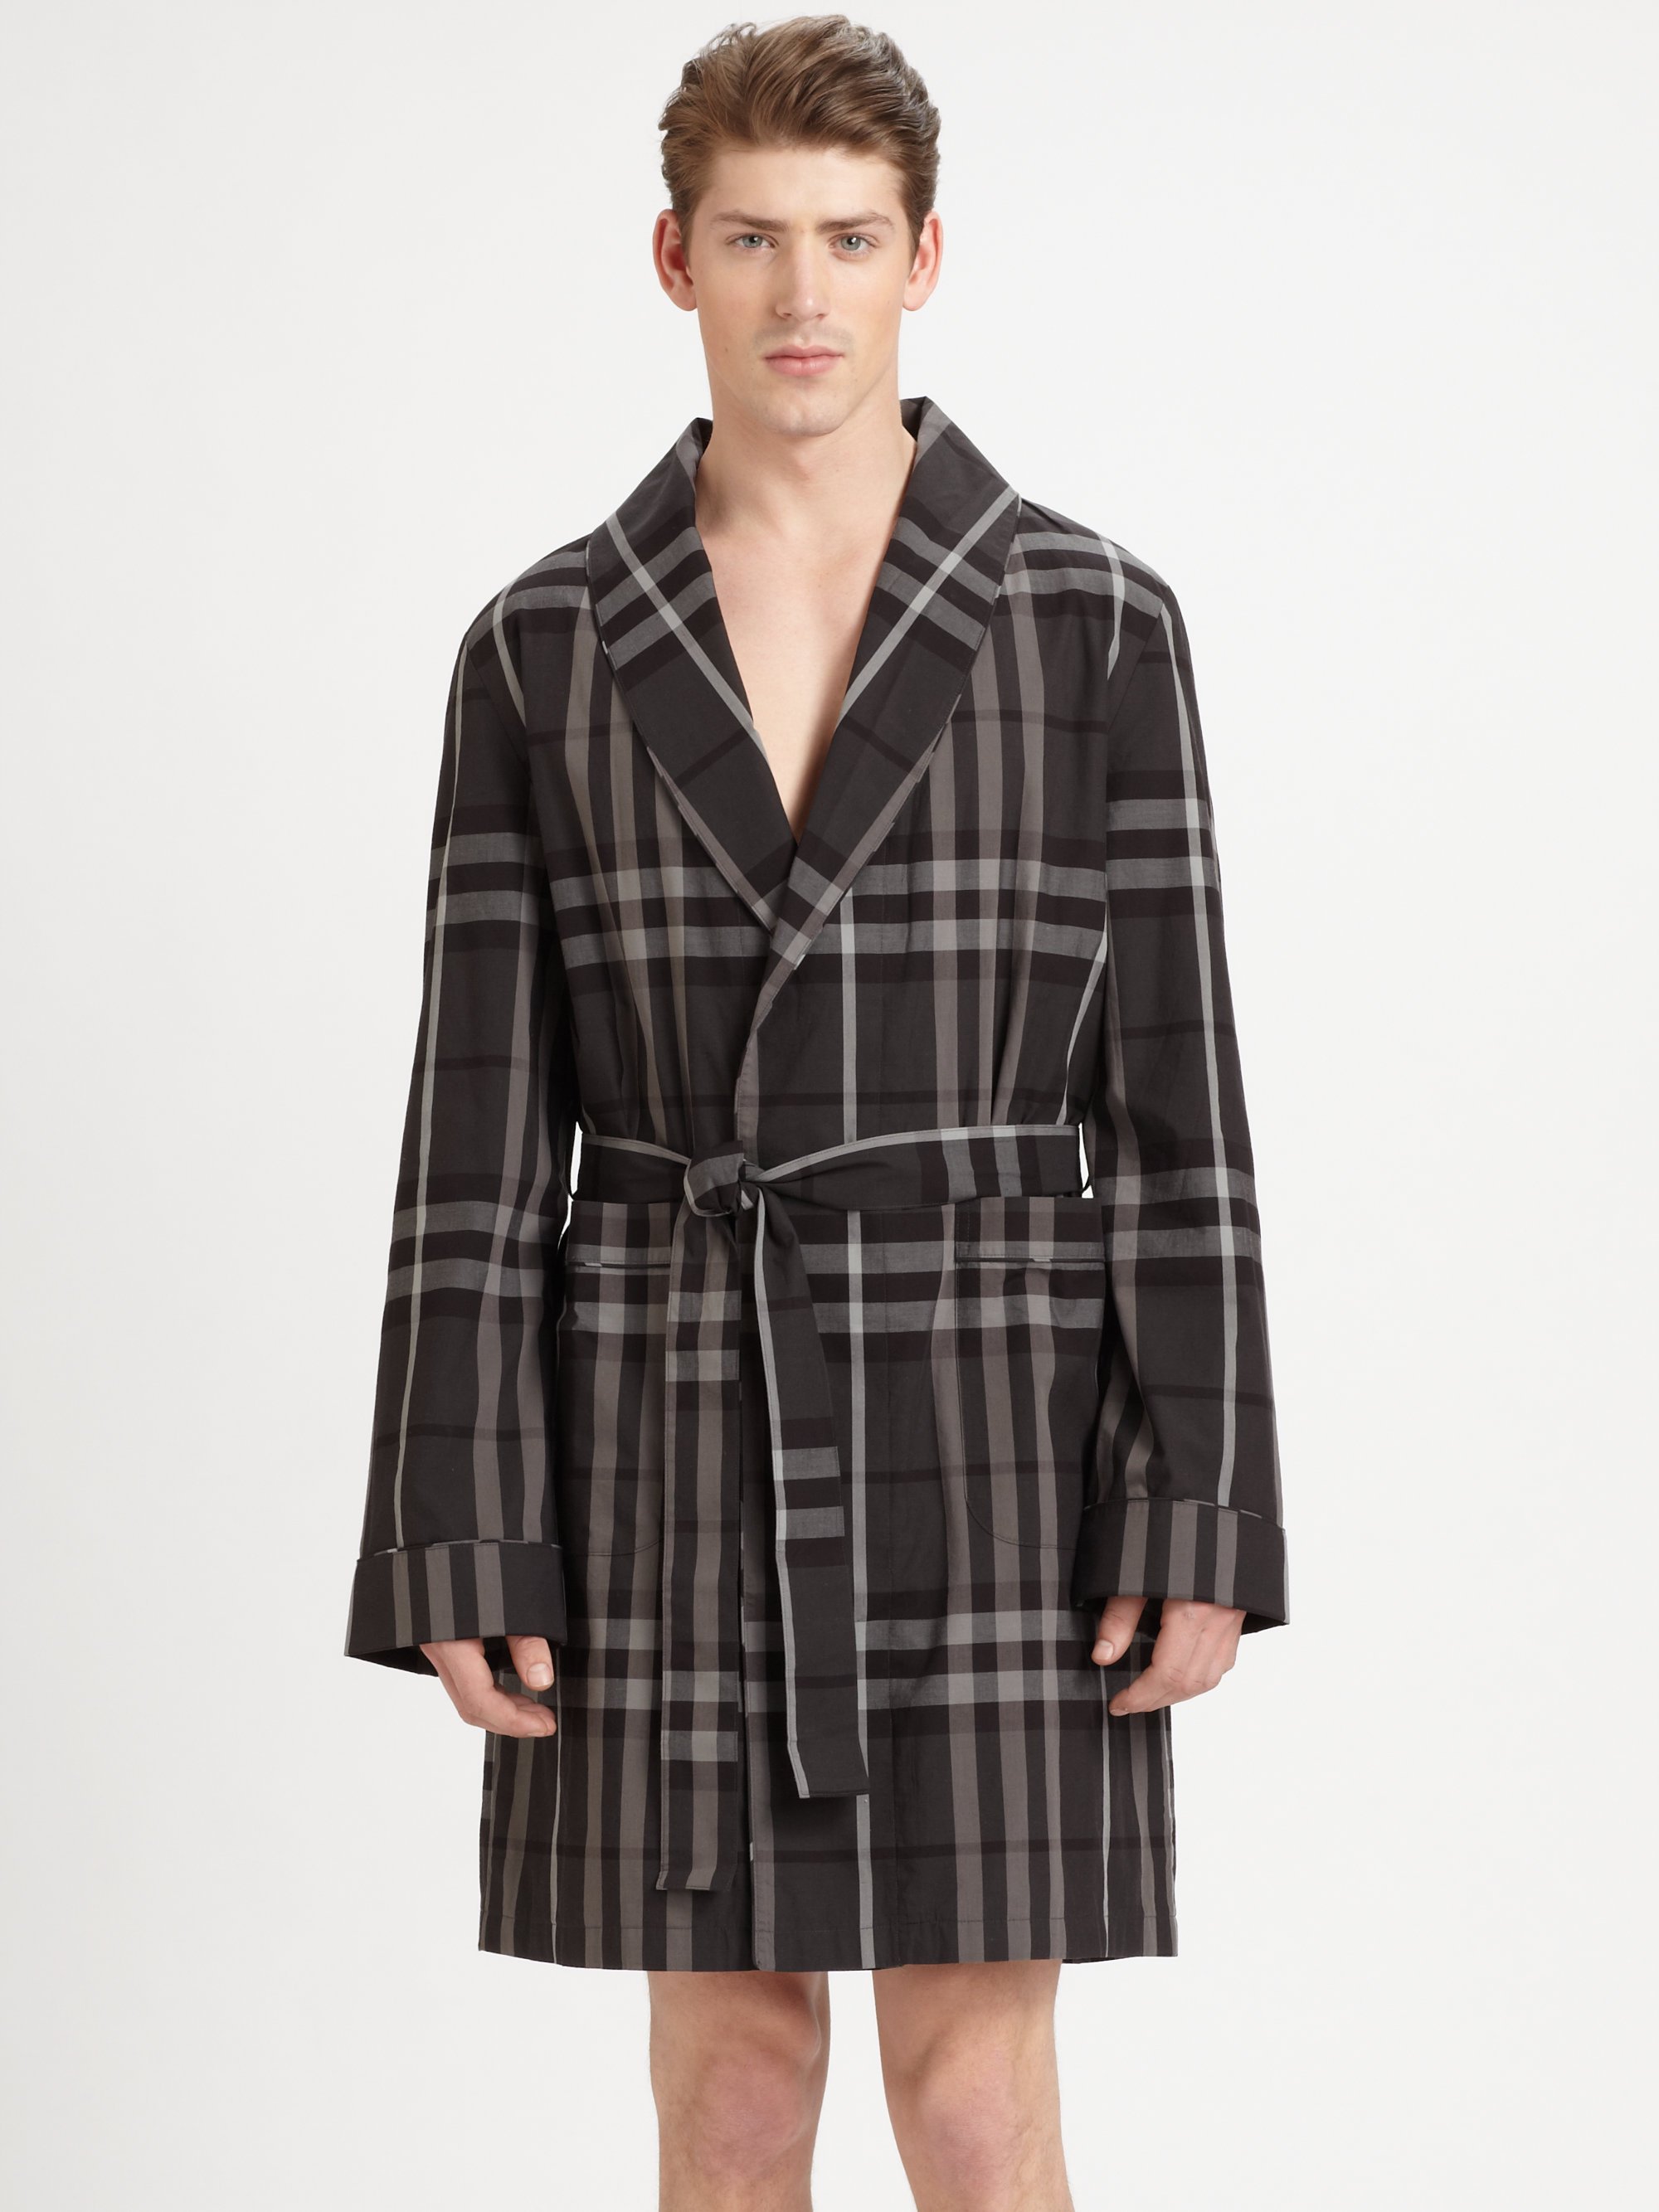 Burberry Check Robe in Dark Charcoal 